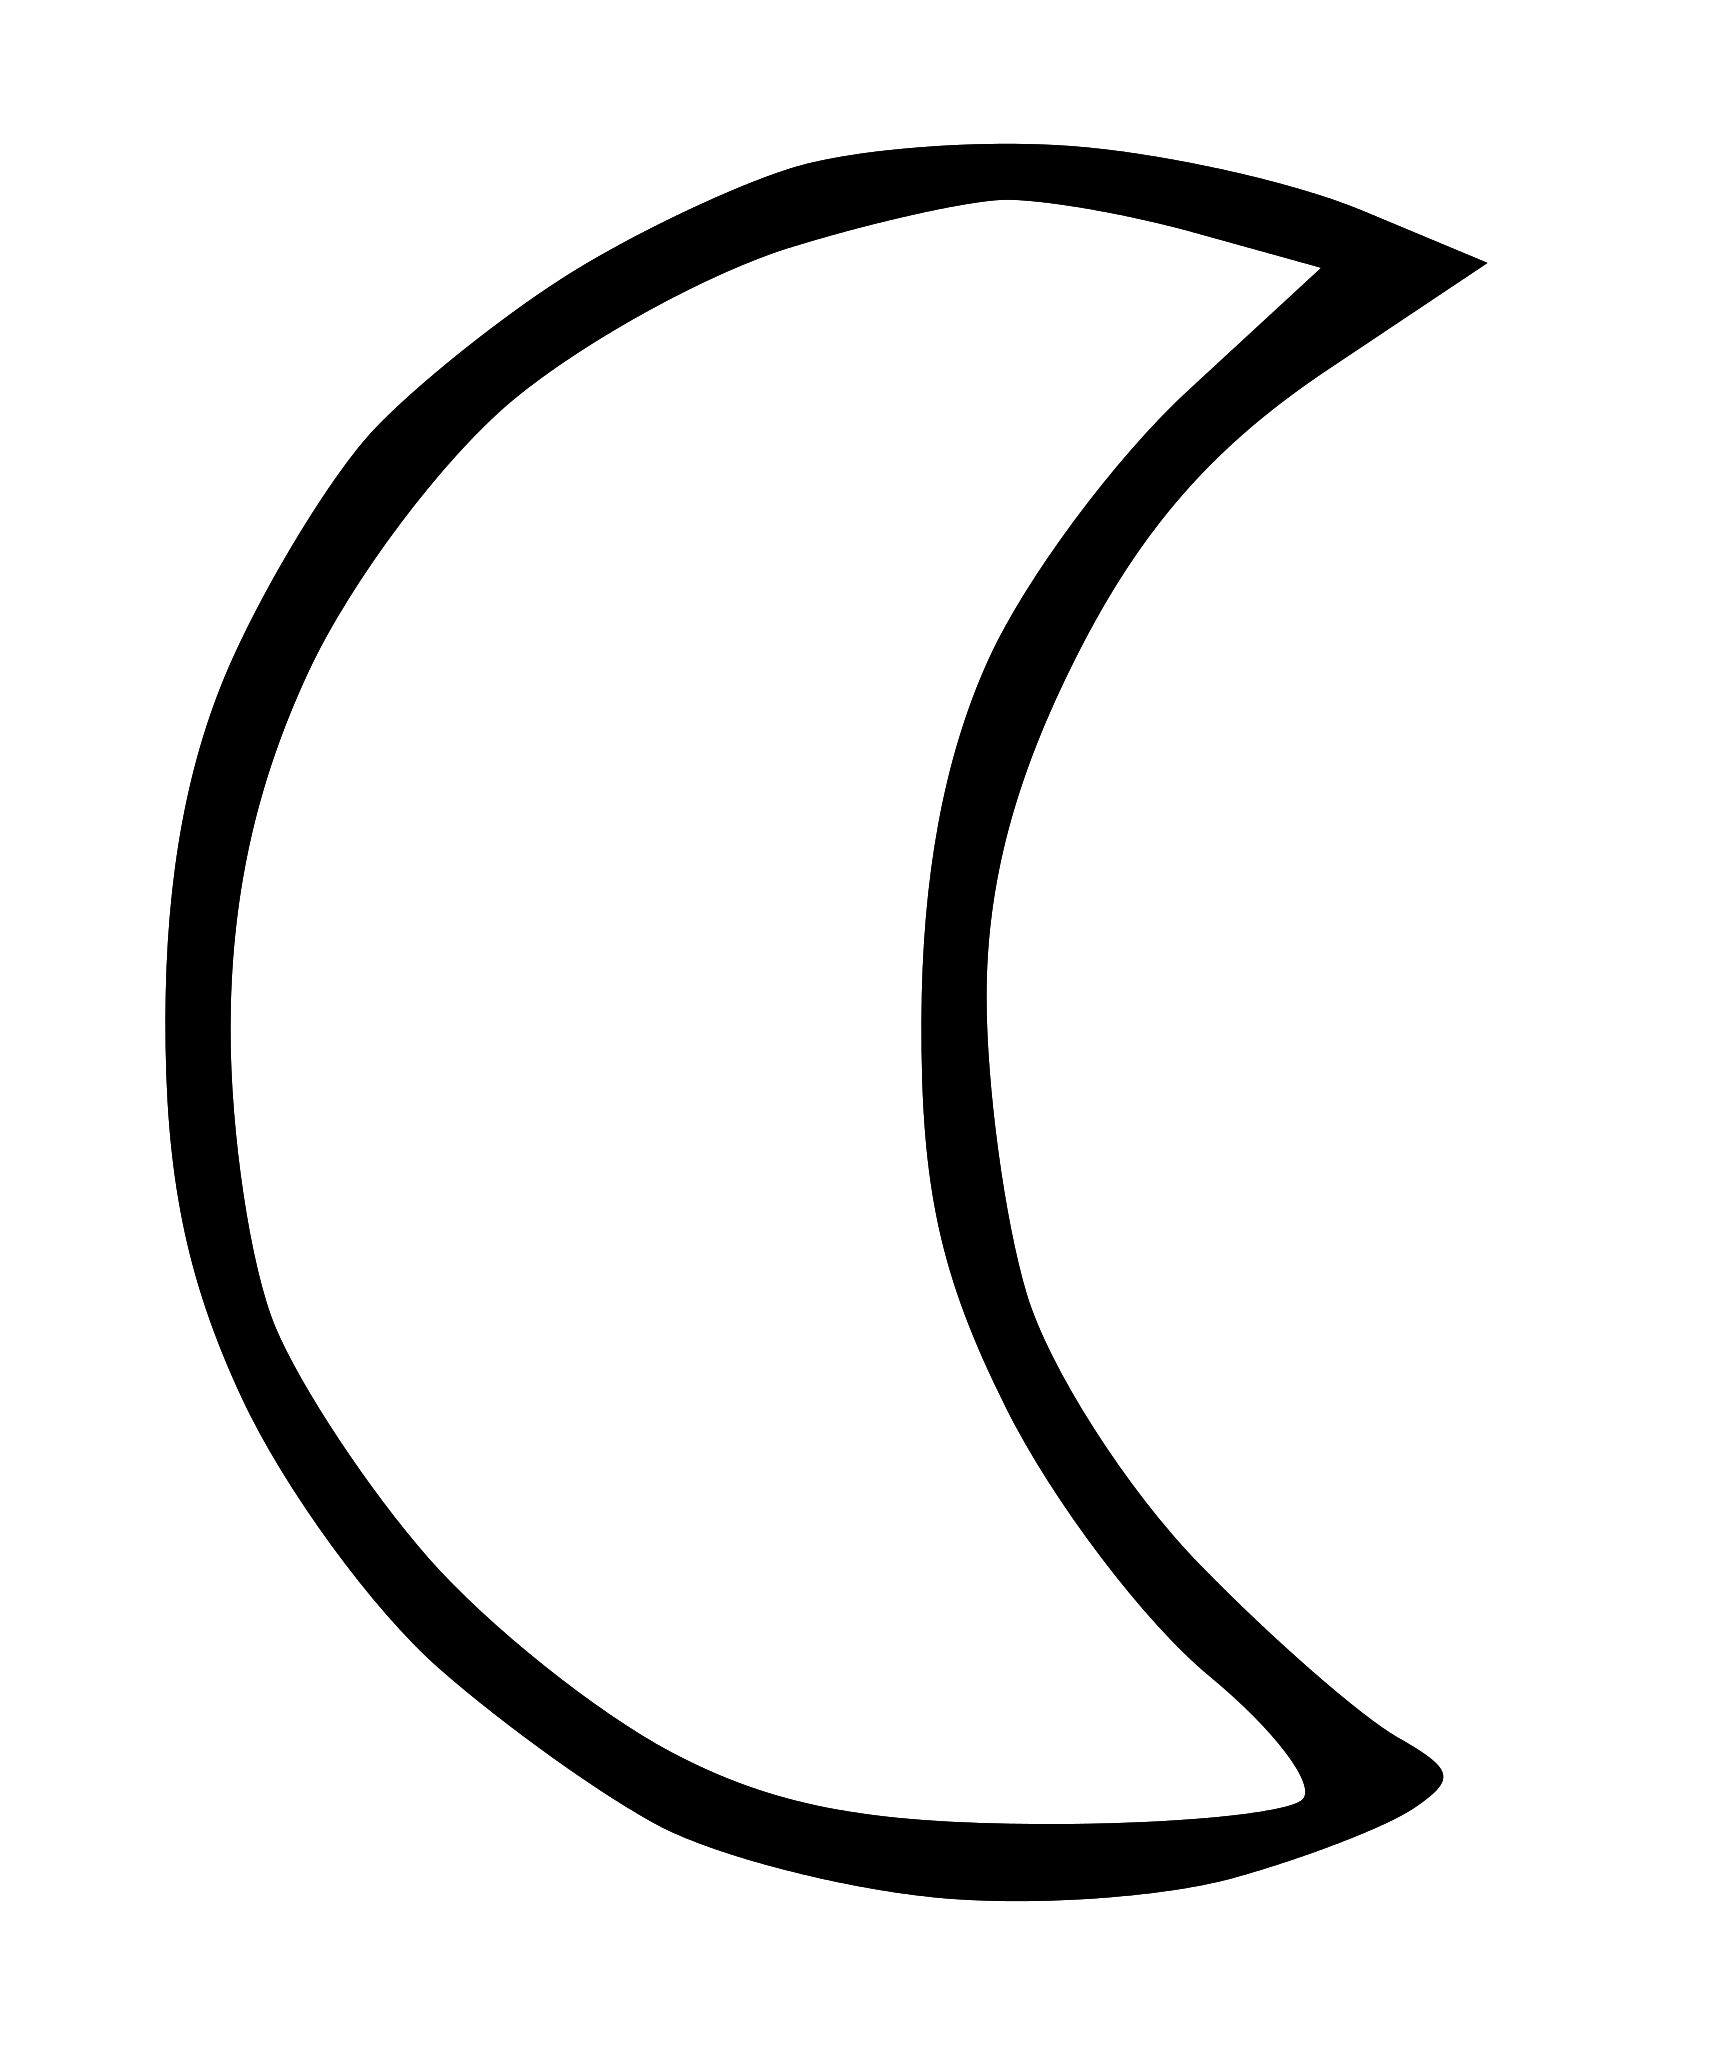 moon outline clipart - photo #18